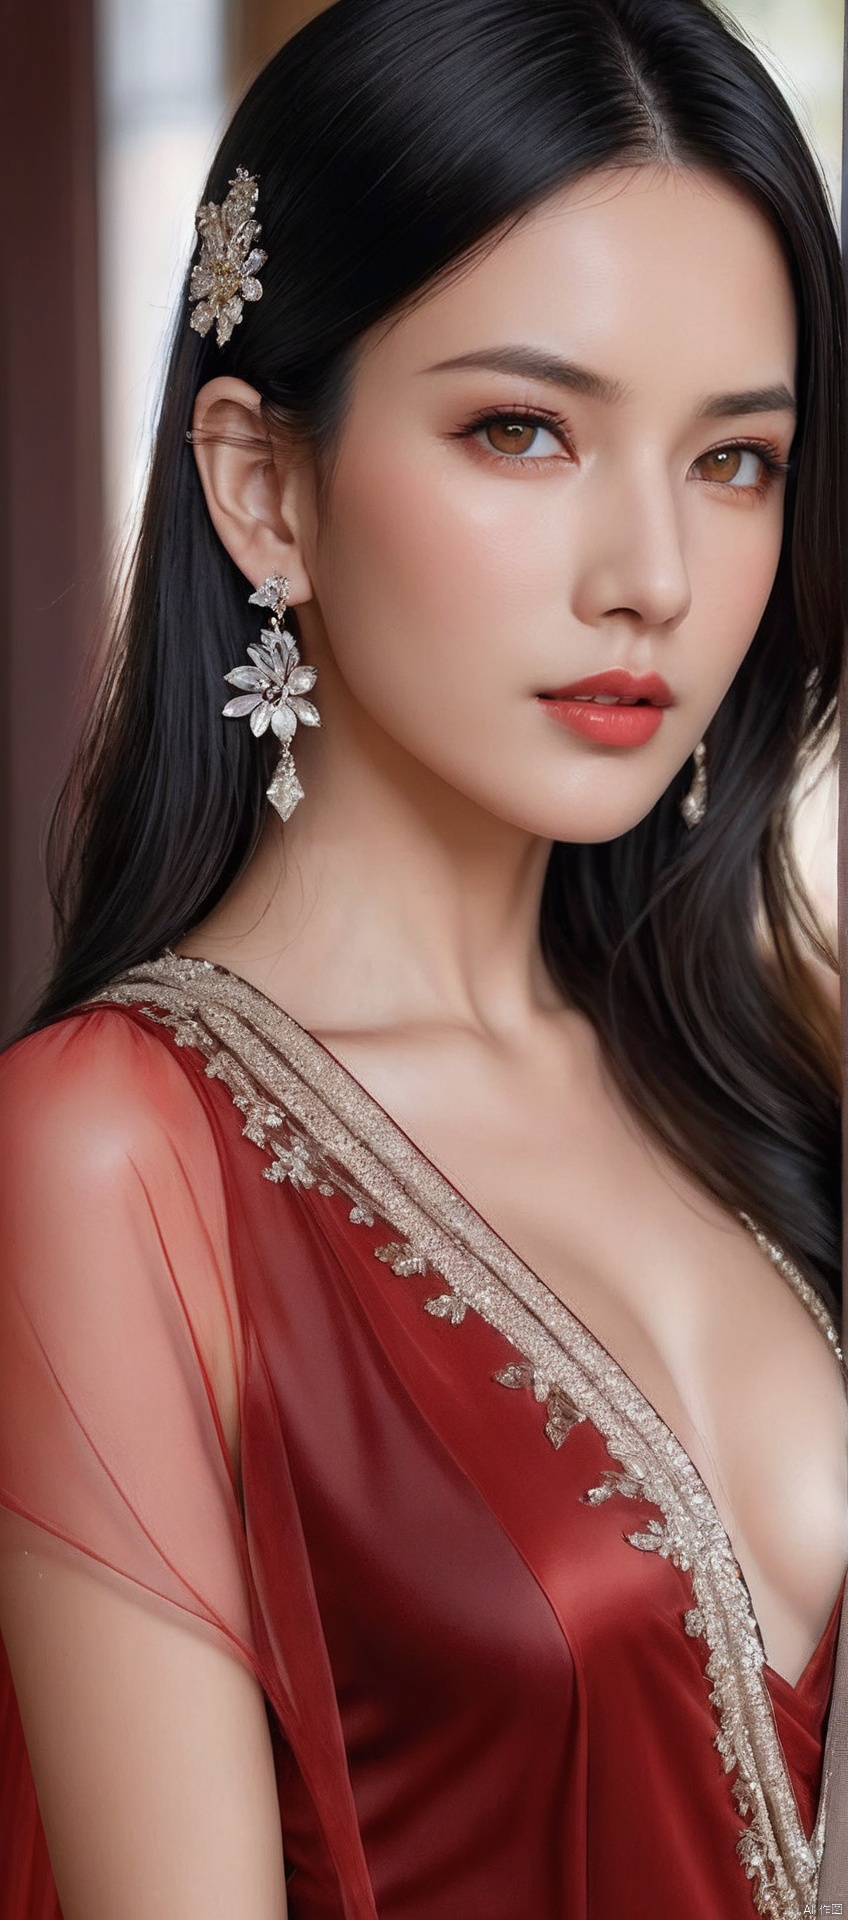  8k,RAW, Fujifilm XT3, masterpiece, best quality, photorealistic,1girl,solo, diamond stud earrings, long straight black hair, hazel eyes, serious expression, slender figure,(upper body shot), (upper body view),dodger red see through dress,red transparent shawl,beautiful symmetrical face,in the style of elegant clothing,high heels,g002,g001,